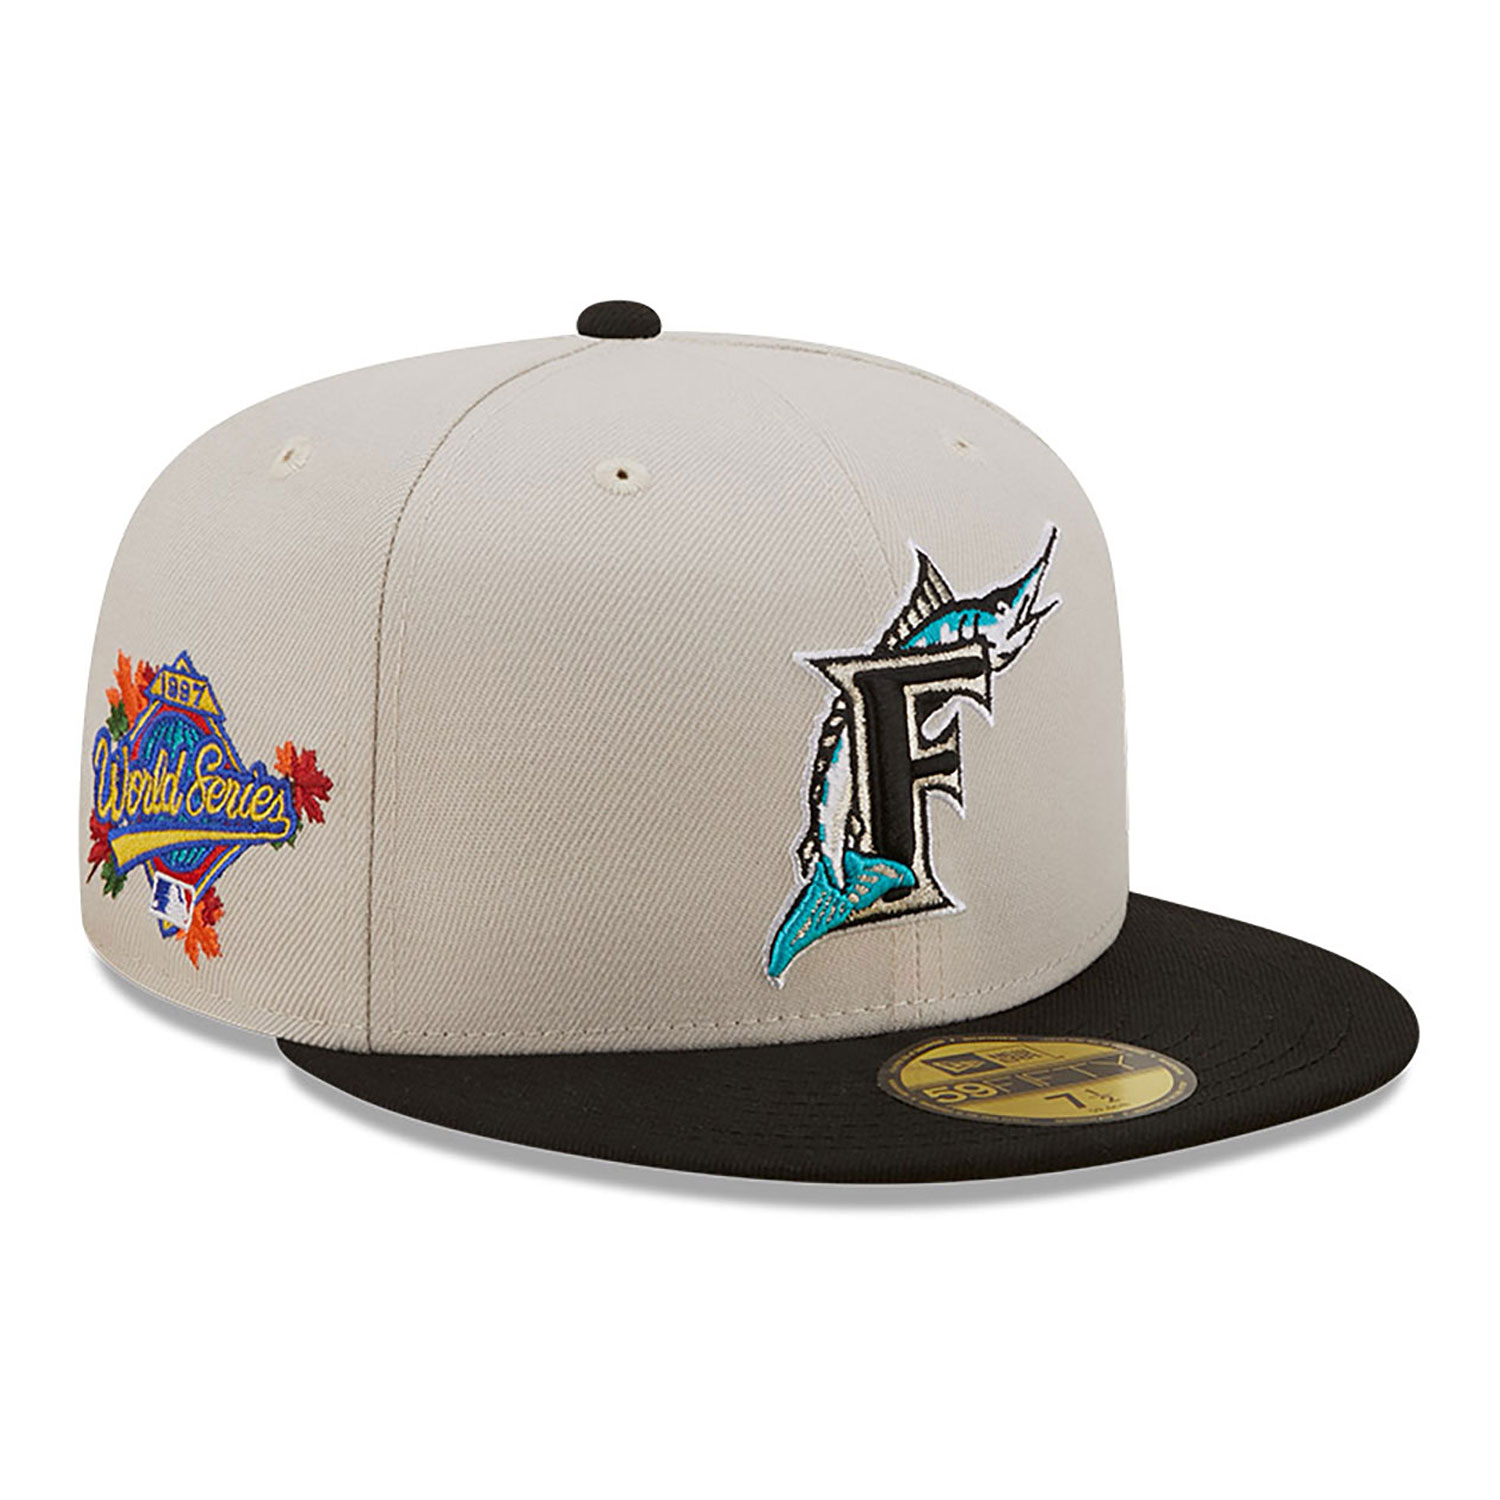 Florida Marlins Fall Classic White 59FIFTY Fitted Cap